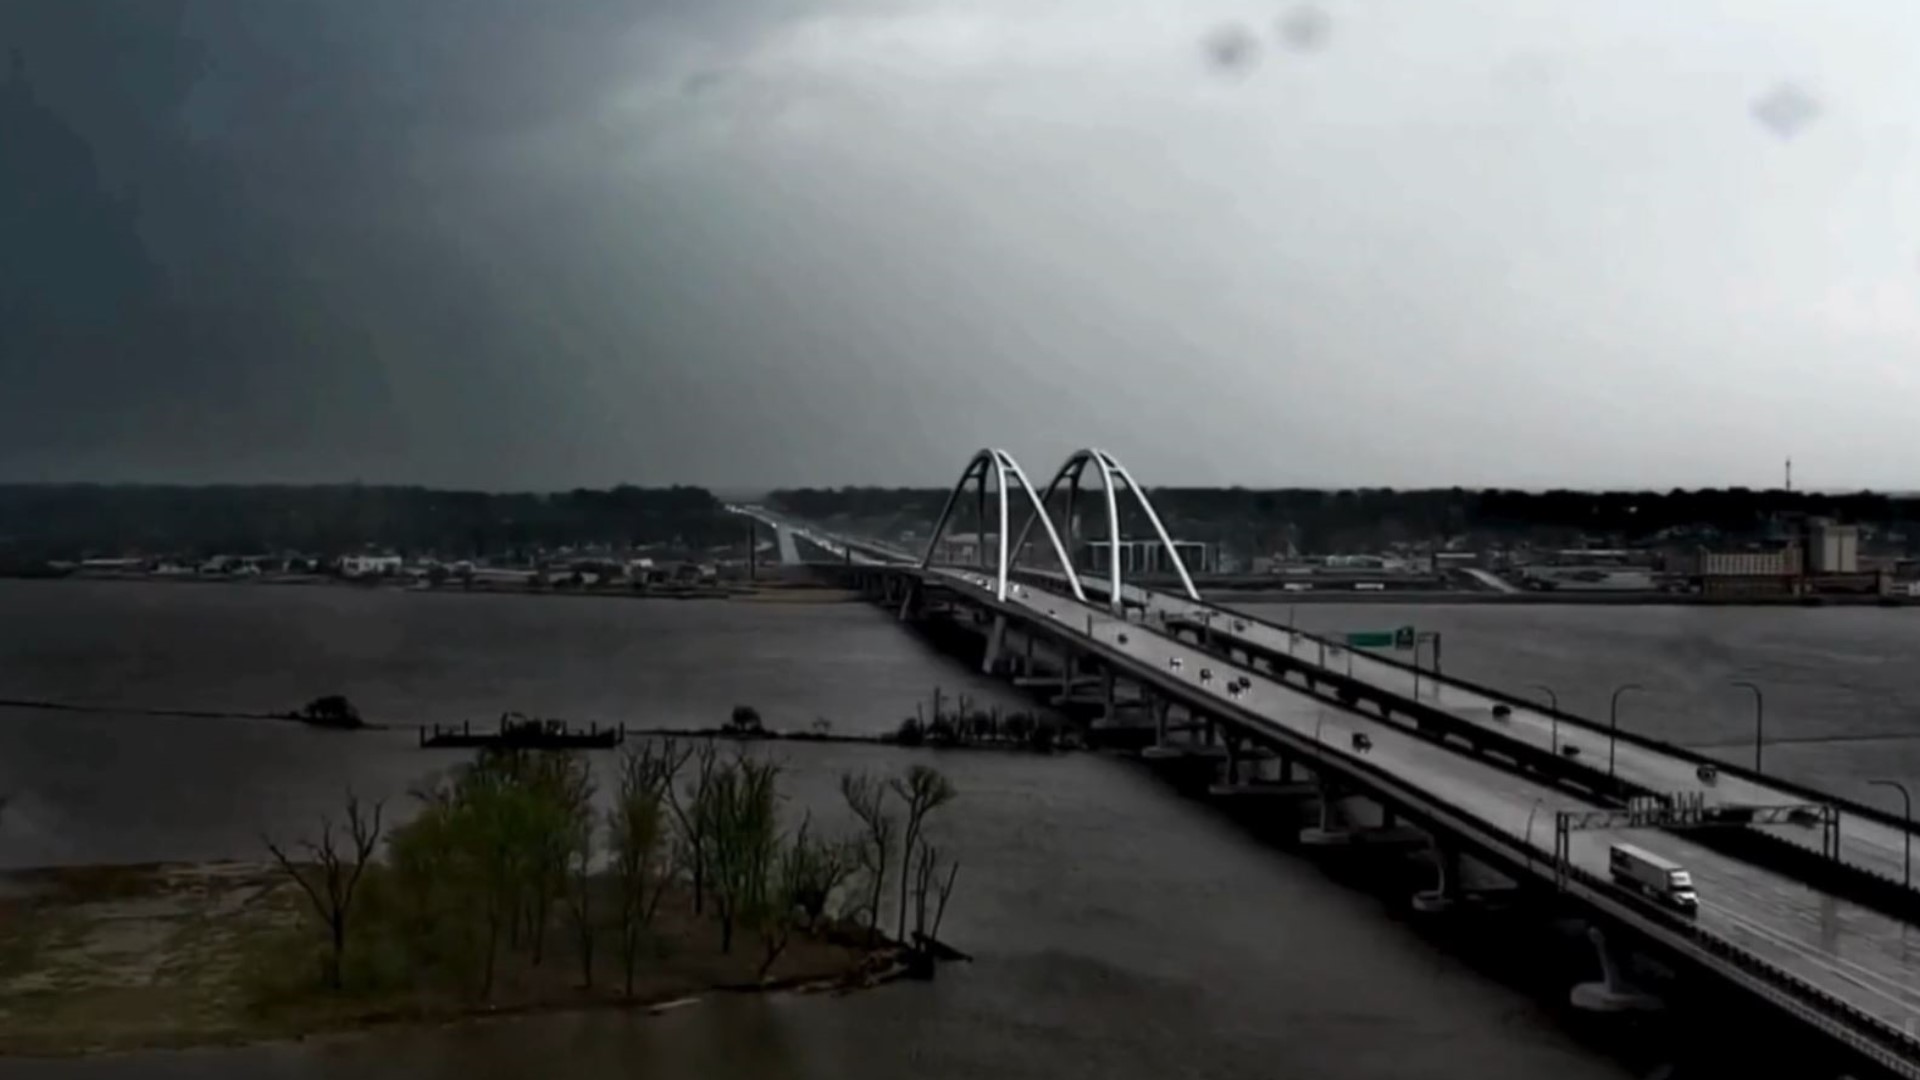 News 8's Bridgepointe camera in downtown Moline captured storms rolling through the area on April 16.